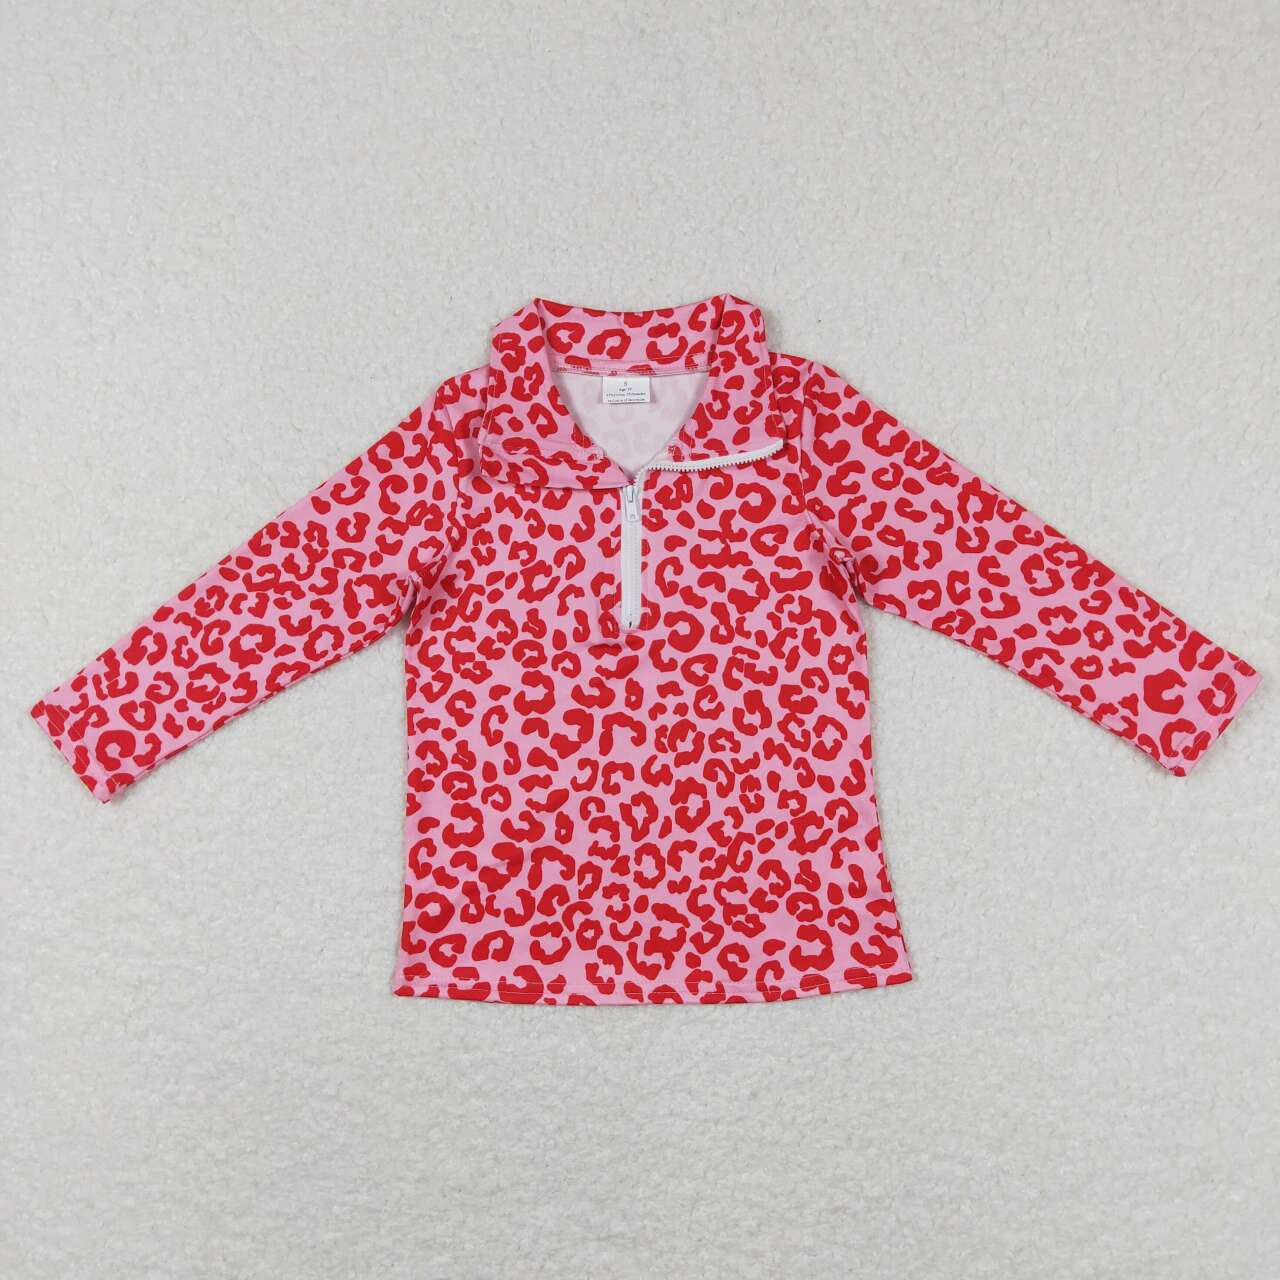 GLP1093 Red Pink Leopard Print Girls Clothes Set